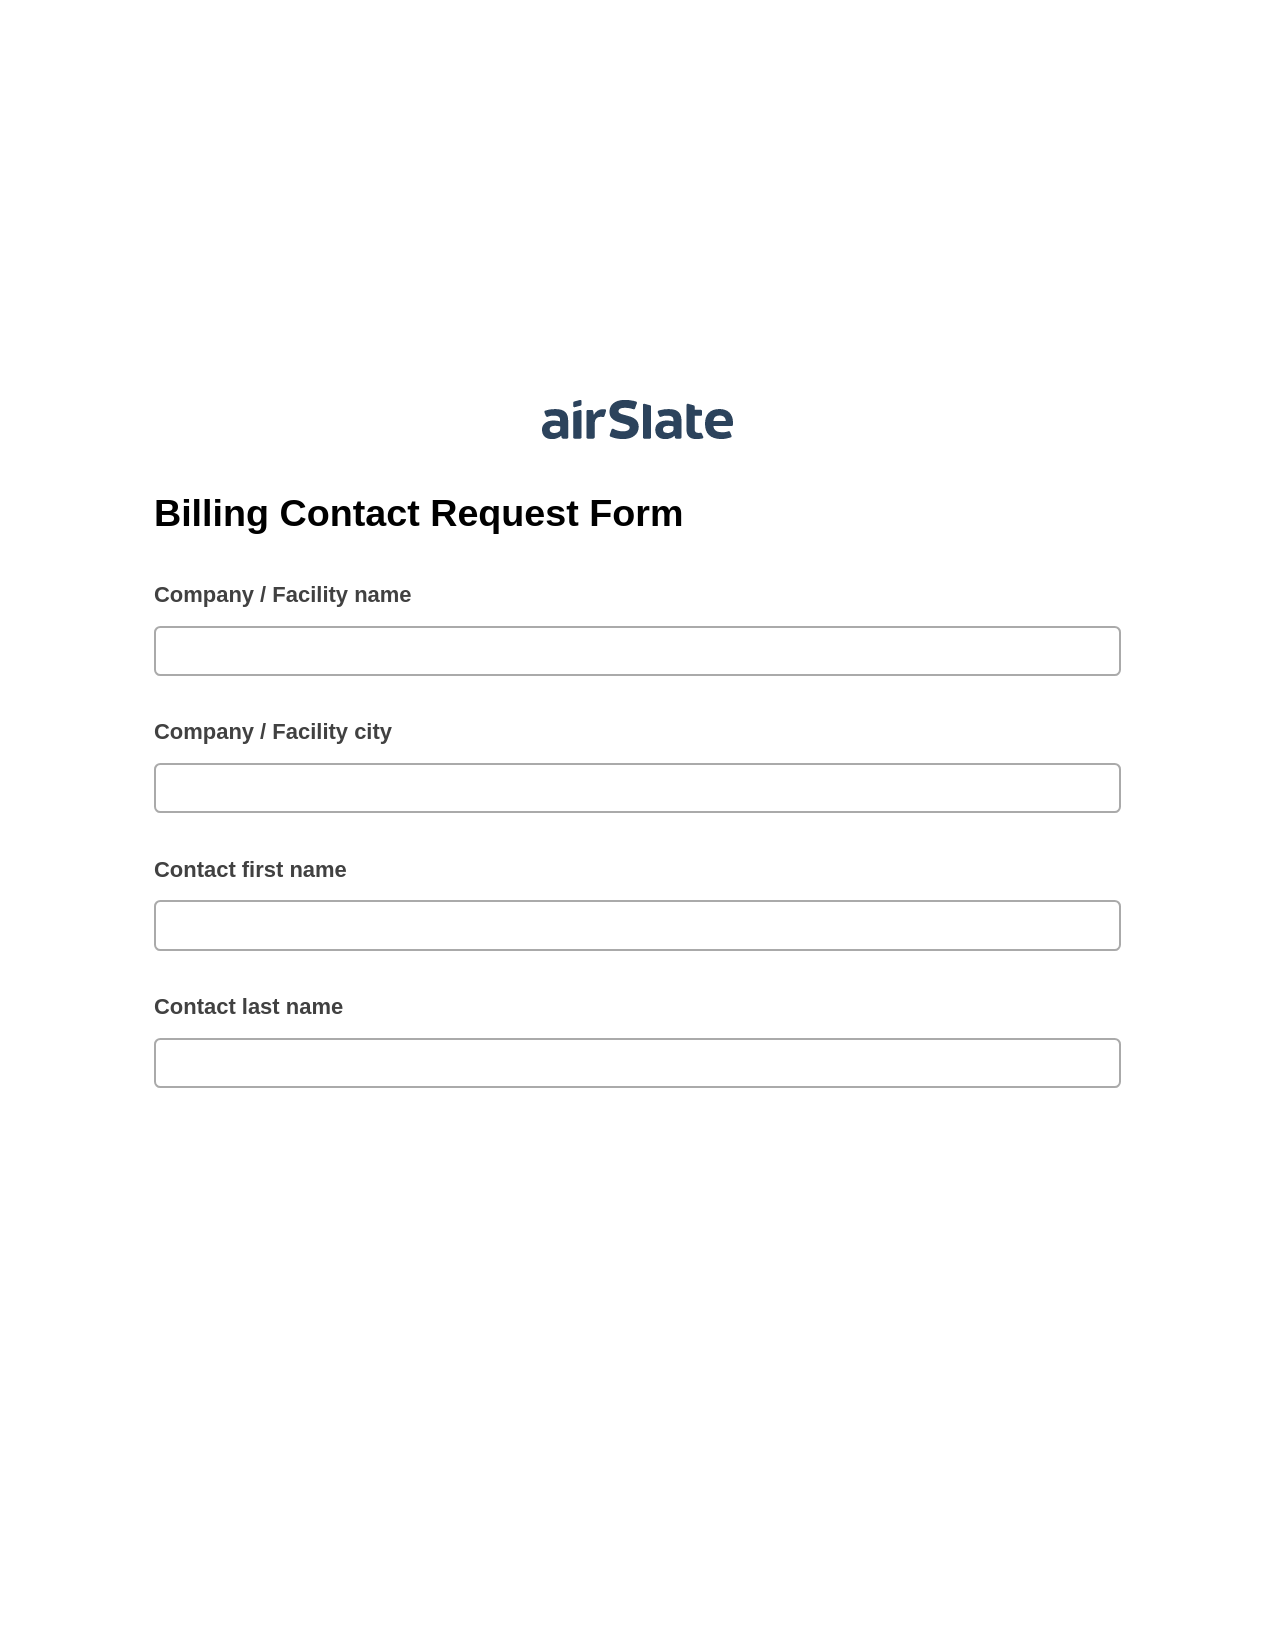 Billing Contact Request Form Pre-fill from Google Sheets Bot, Hide Signatures Bot, Export to NetSuite Record Bot